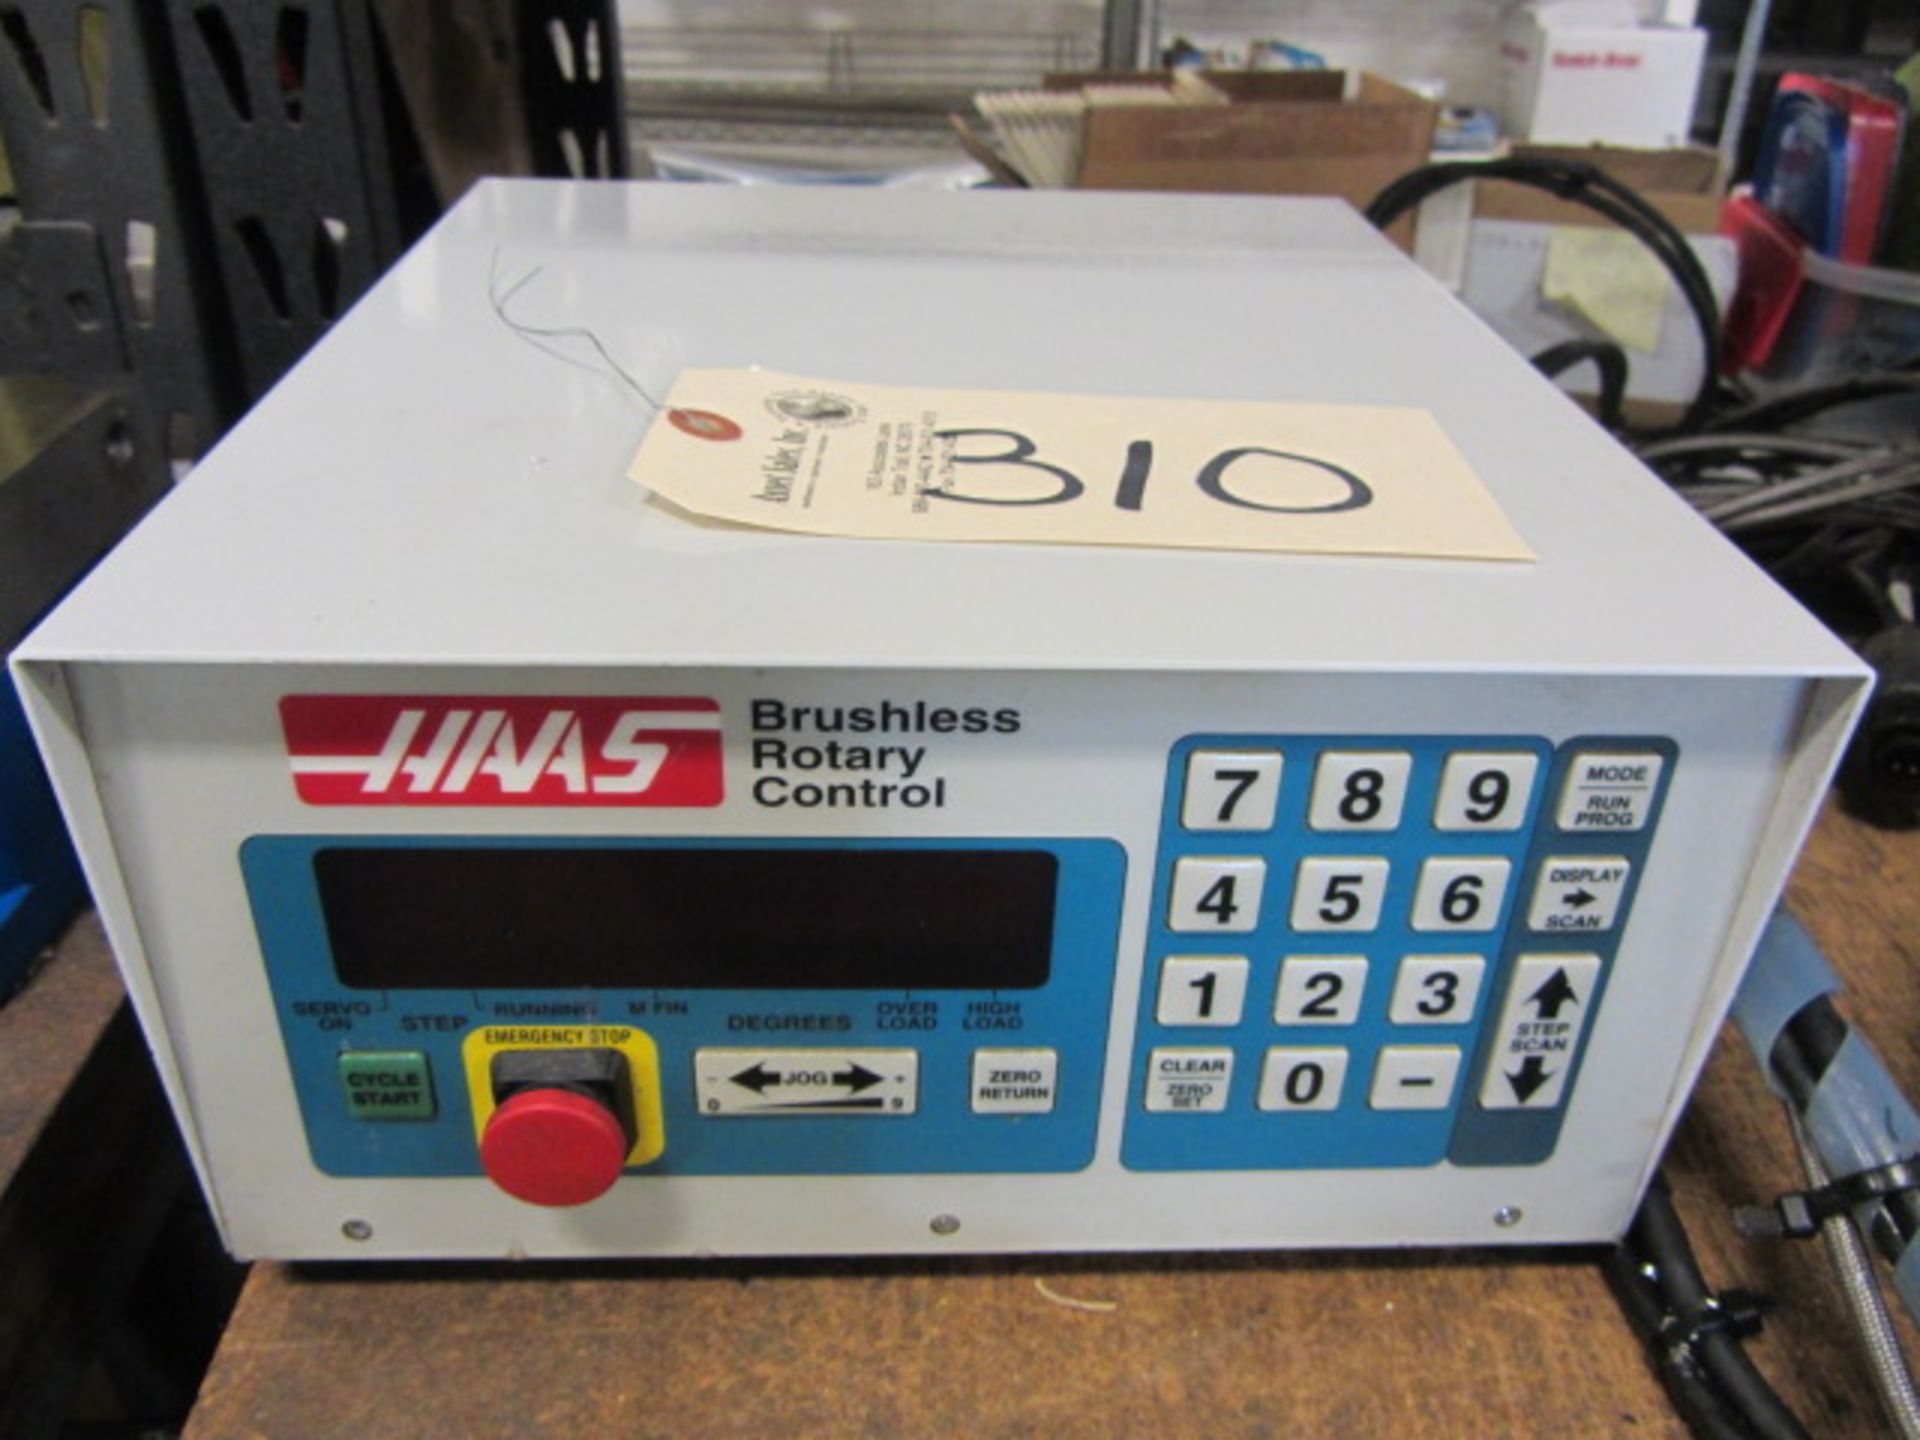 Haas Brushless Rotary Control, sn:802368